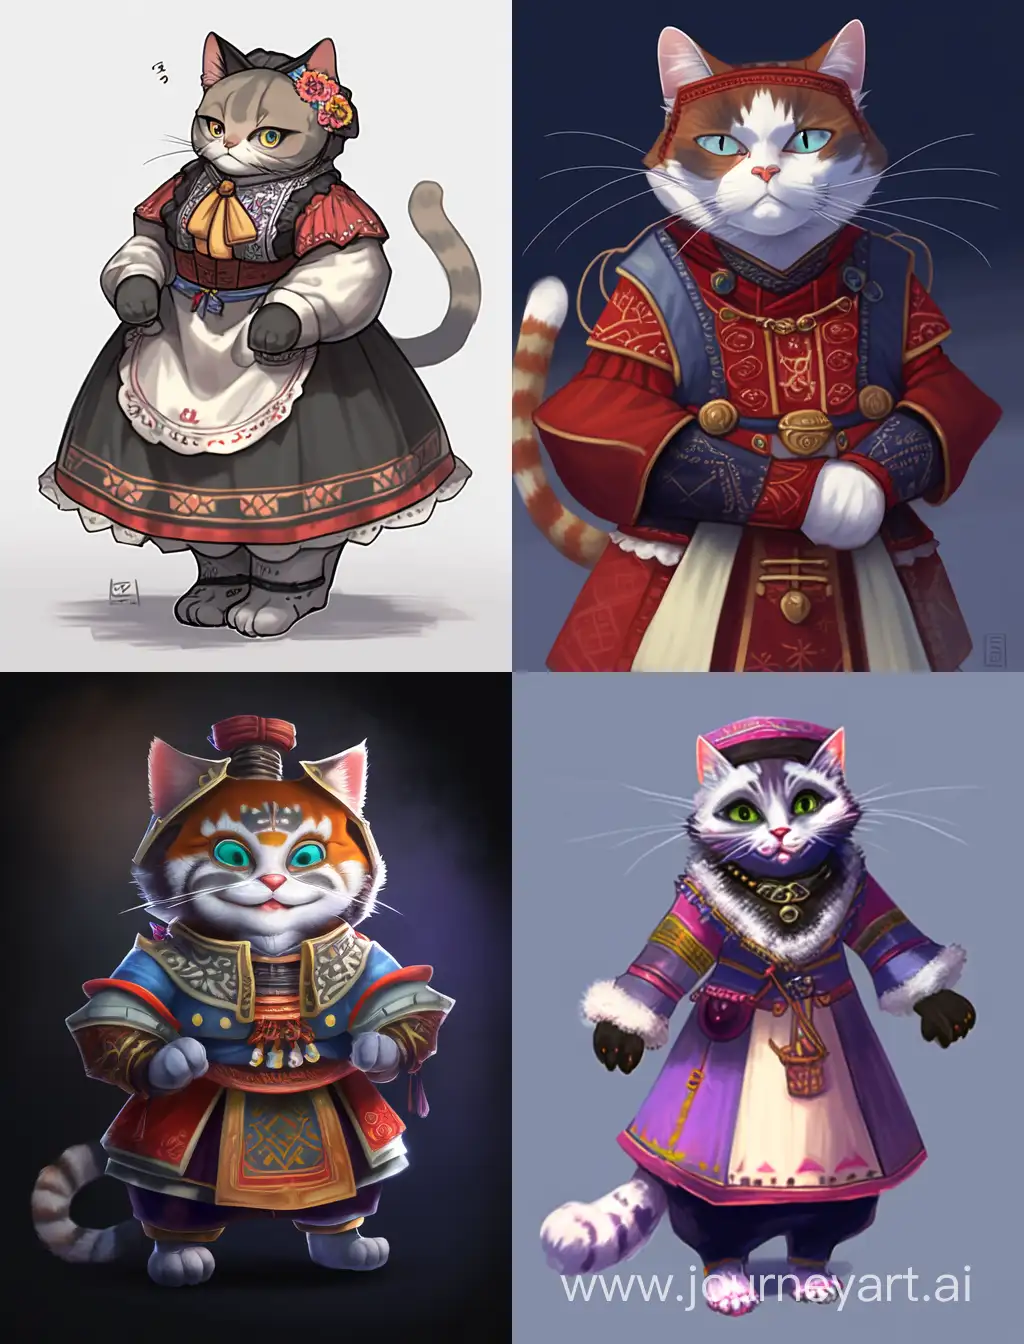 Whimsical-Cartoon-Cat-in-Traditional-Russian-Costume